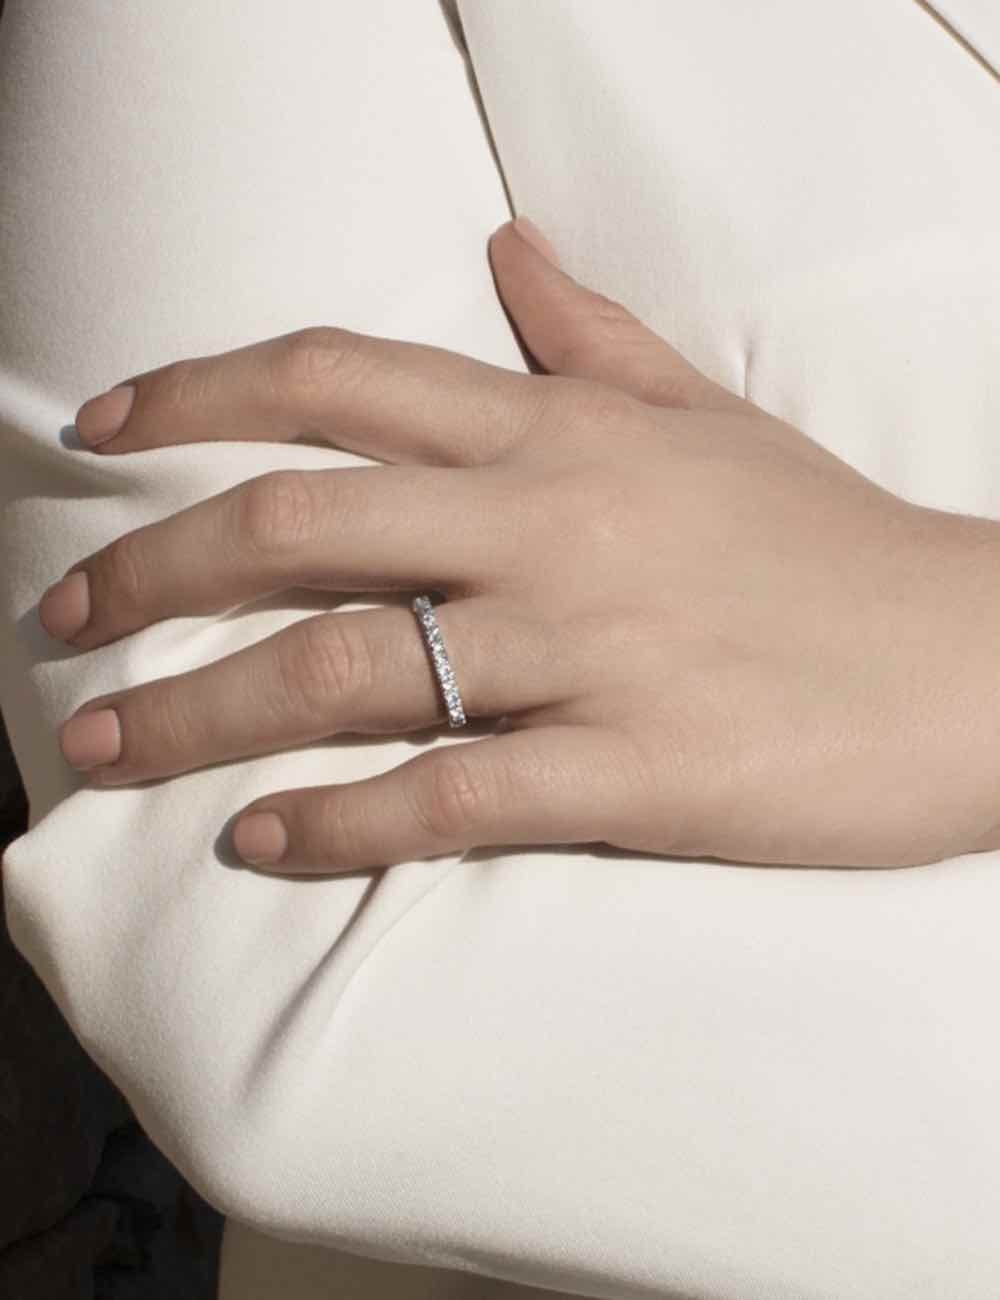 Women's platinum wedding band with white diamonds in a half-eternity setting, claw-set, creating a refined sparkle.